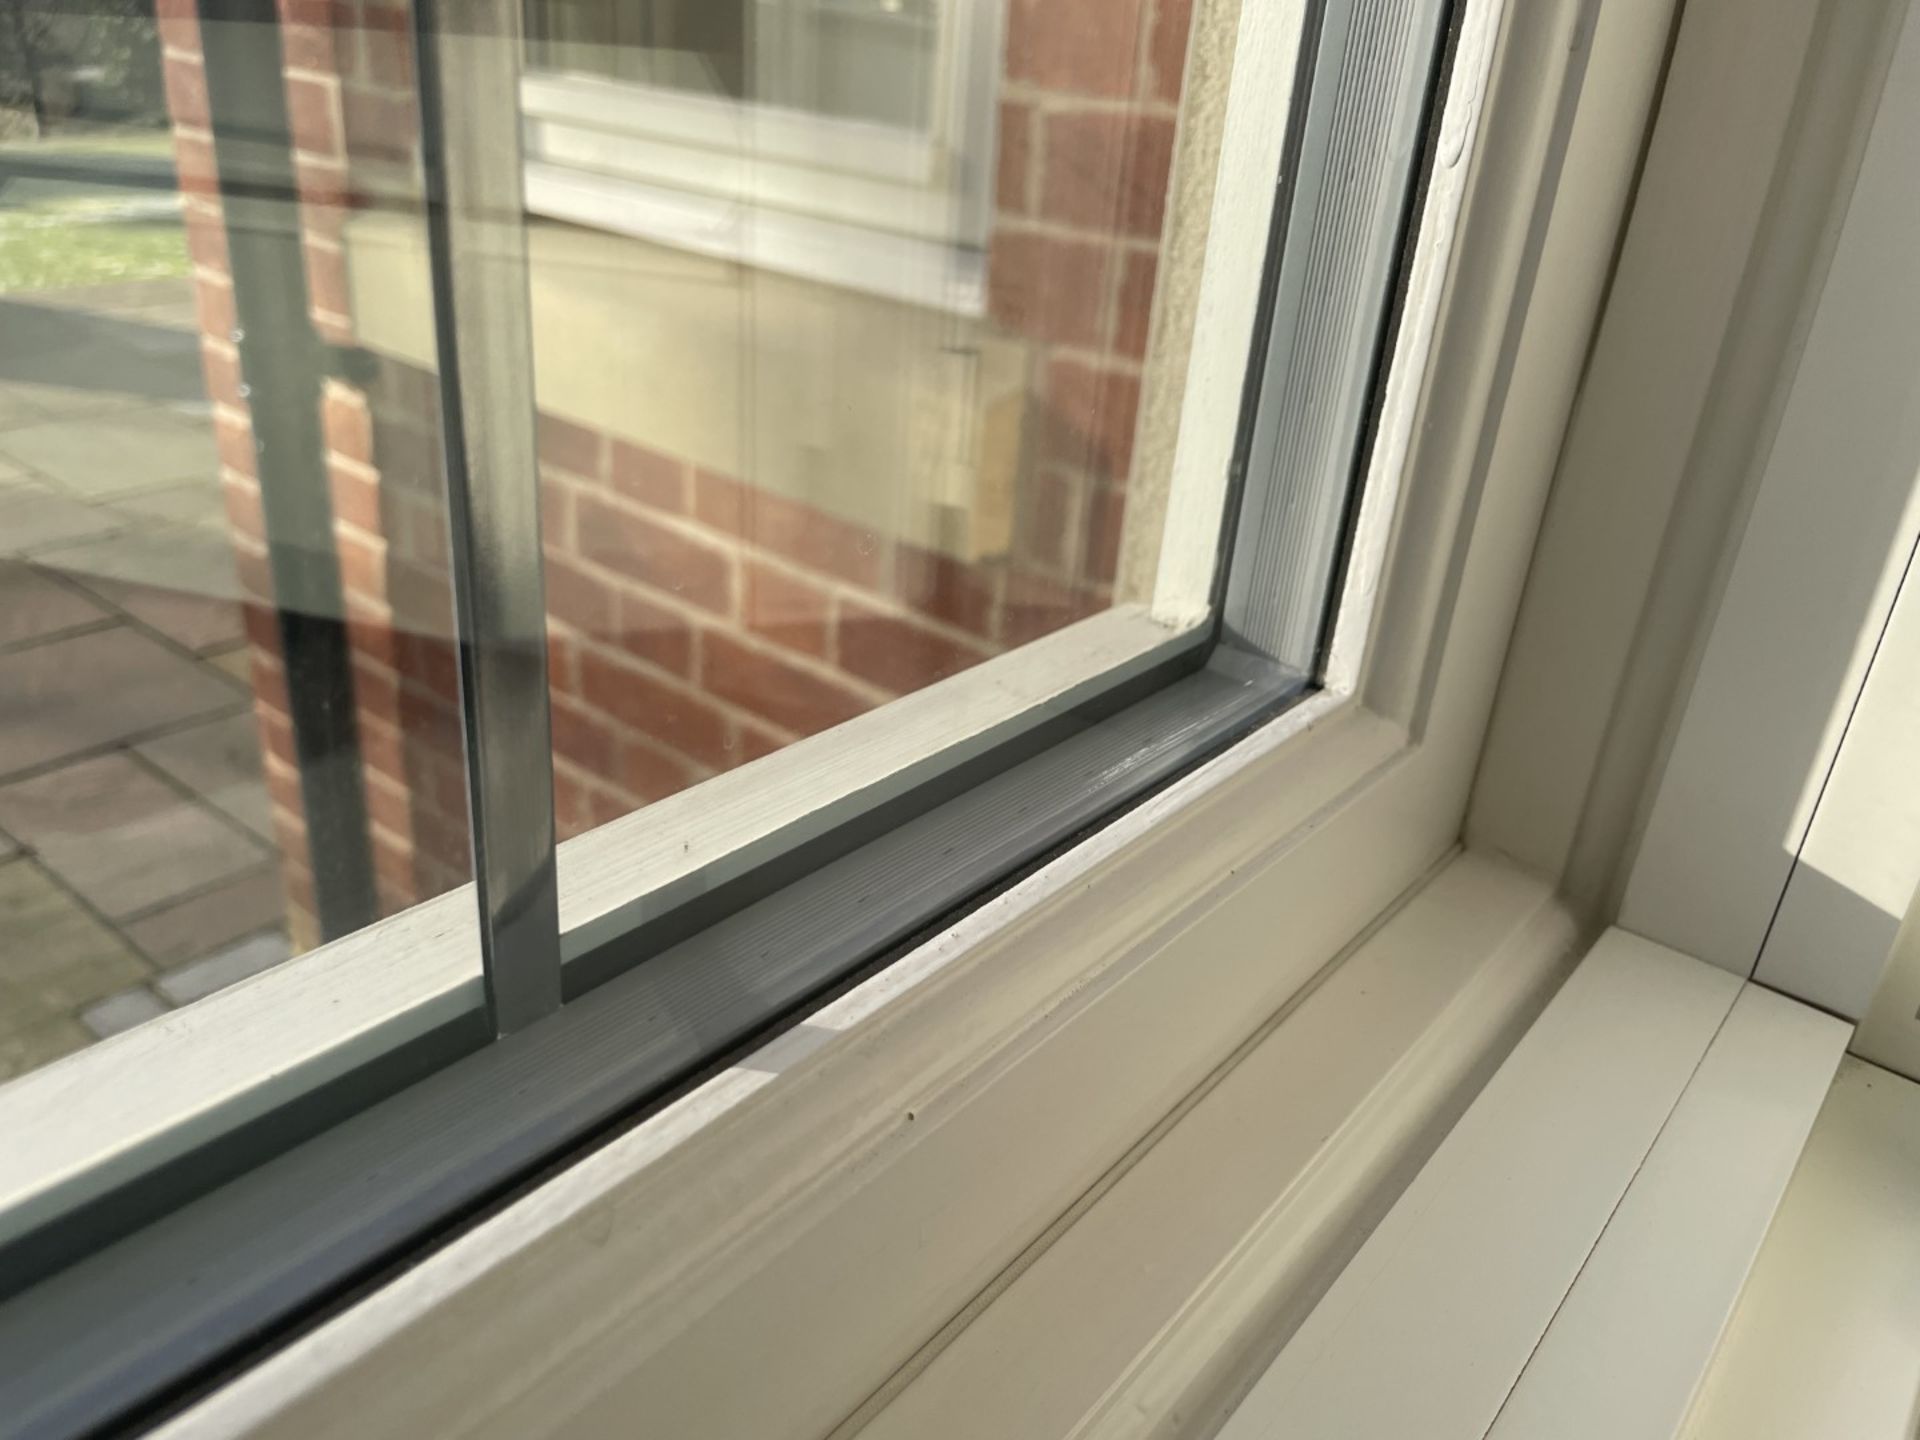 1 x Hardwood Timber Double Glazed Window Frames fitted with Shutter Blinds, In White - Ref: PAN105 - Image 5 of 11